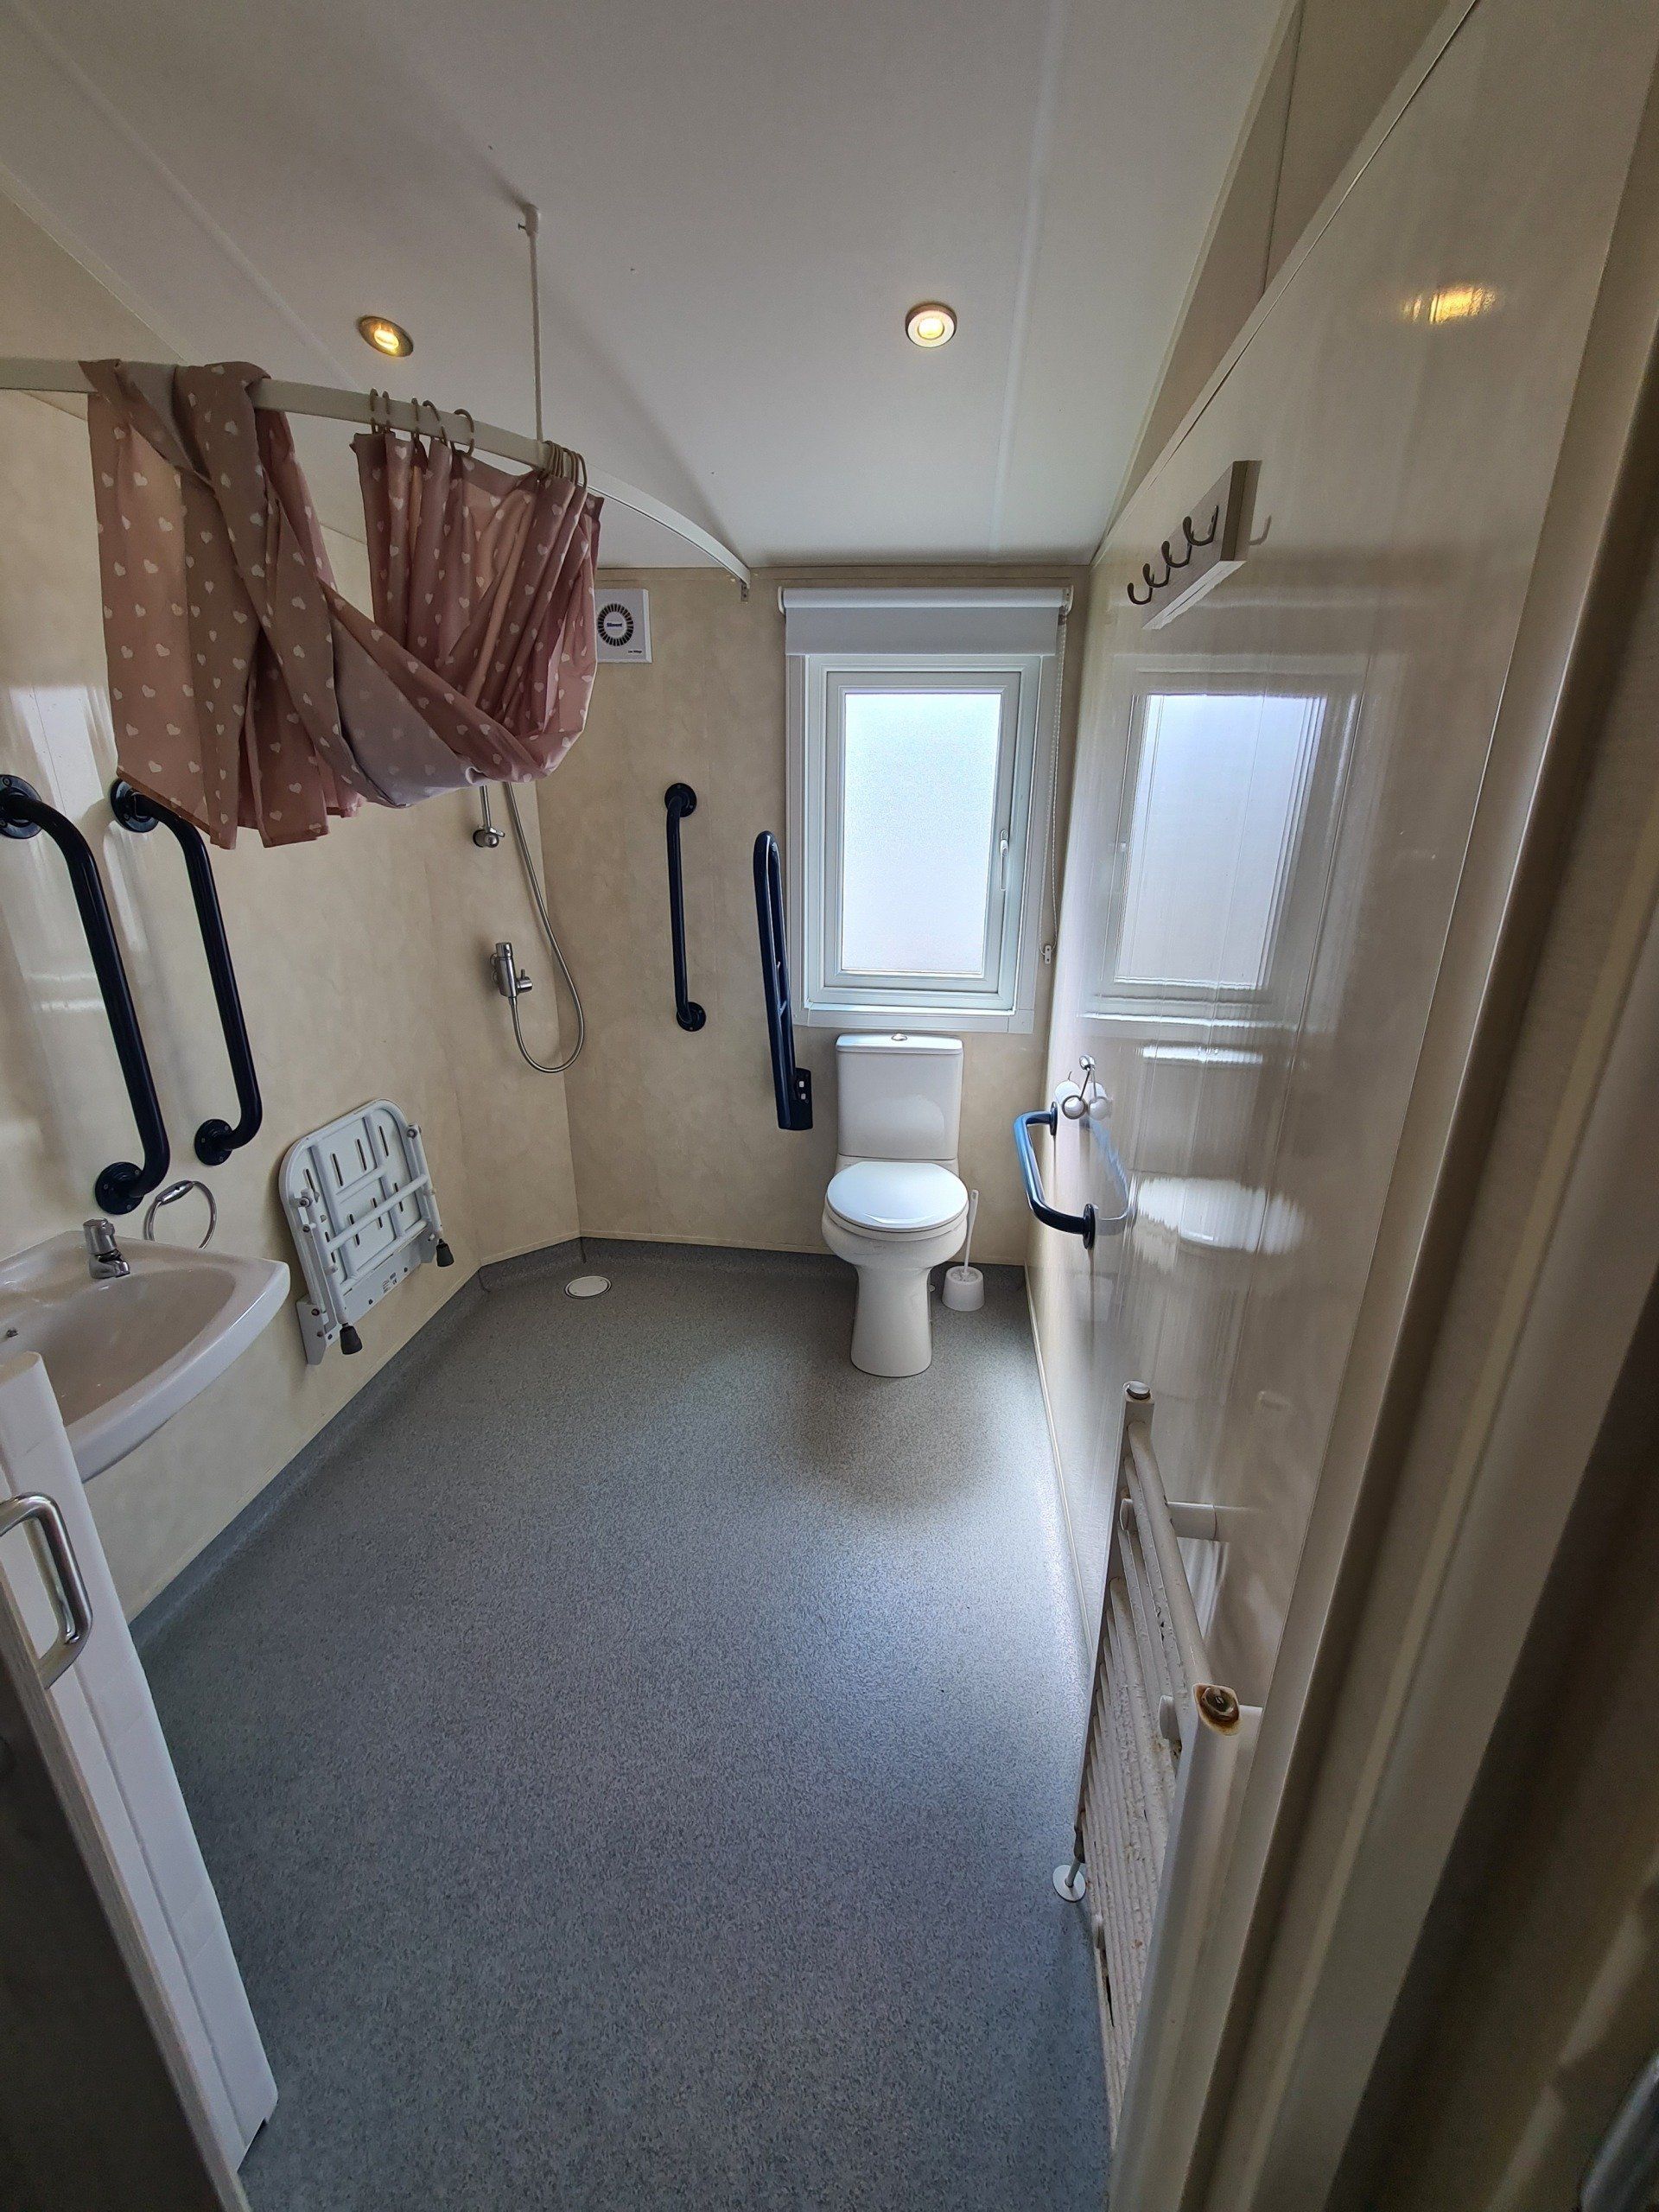 a picture of the wetroom from the hallway showing the toilet with grab handles, shower in the corner and a foldable seat under the shower